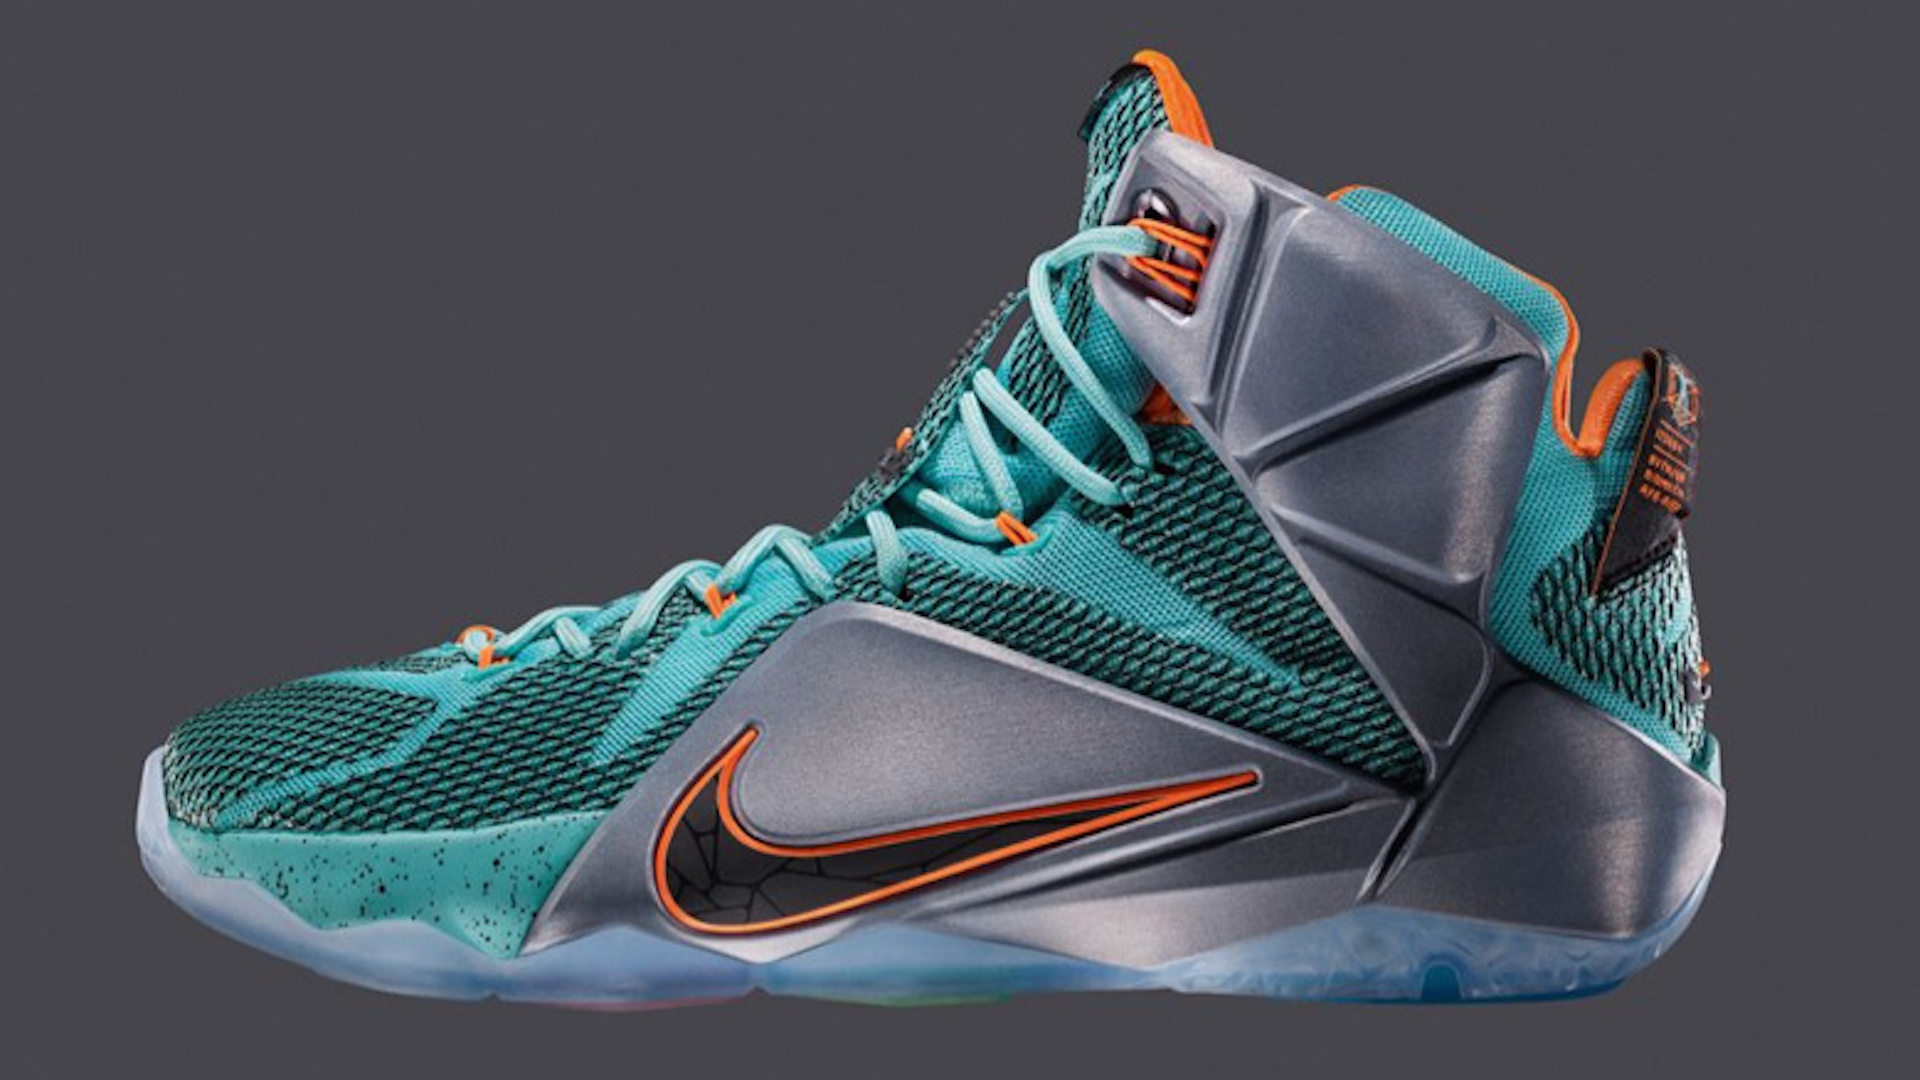 Nike releases newest LeBron James signature shoe in LeBron 12 Sporting News